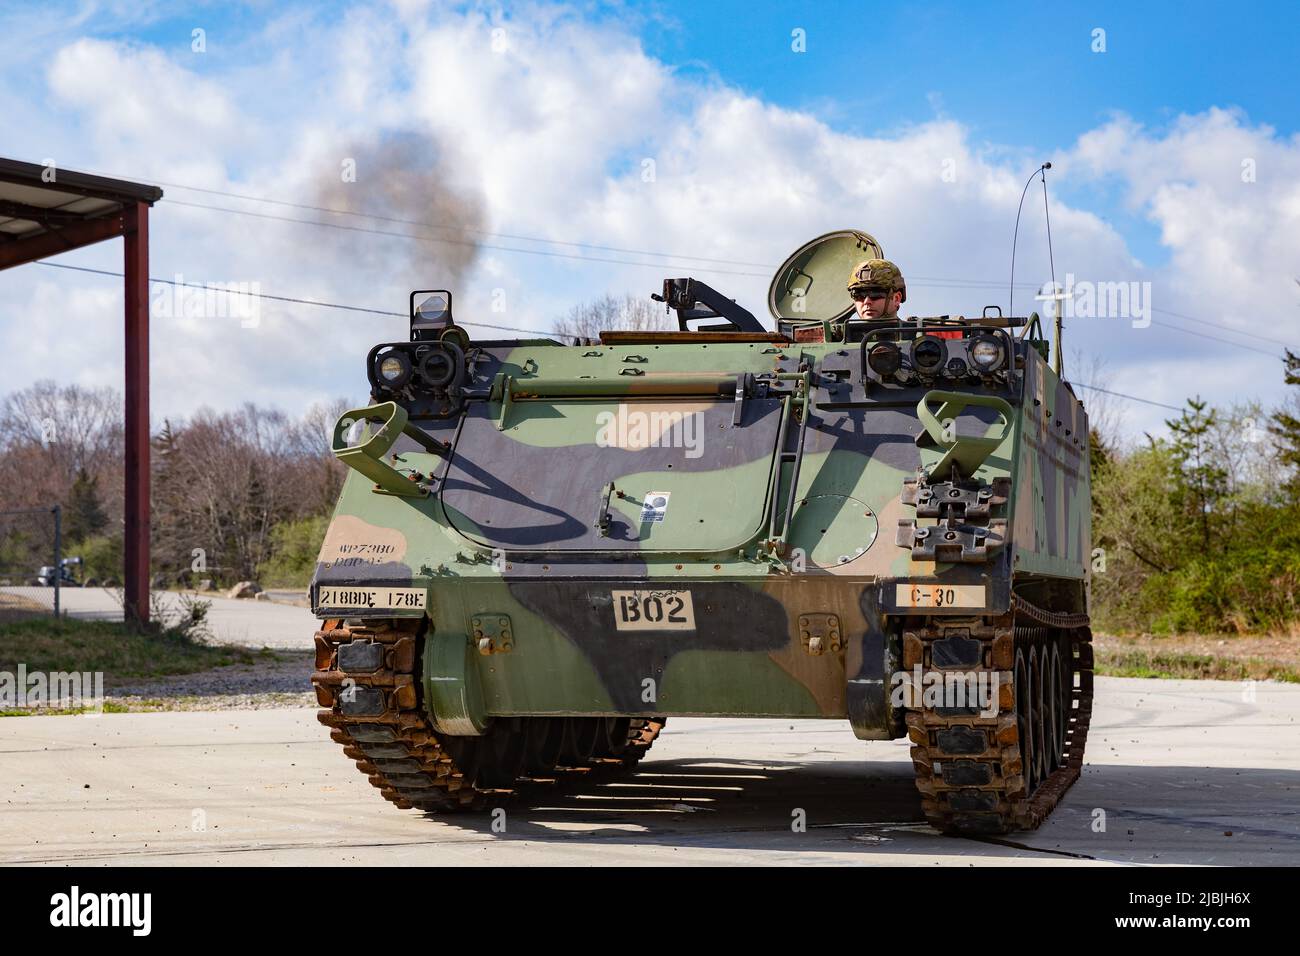 A U.S. Army soldier assigned to the Connecticut Army National Guard operates an M113 Armored Personnel Carrier at Stones Ranch Military Reservation, East Lyme, Connecticut, April 27, 2022. This M113 is one of 200 armored personnel carriers, or APCs, being supplied by the Department of Defense to Ukraine as part of the $800 million U.S. Security Assistance for Ukraine aid package signed by President Joe Biden. (U.S. Army photo by Sgt. Matthew Lucibello) Stock Photo